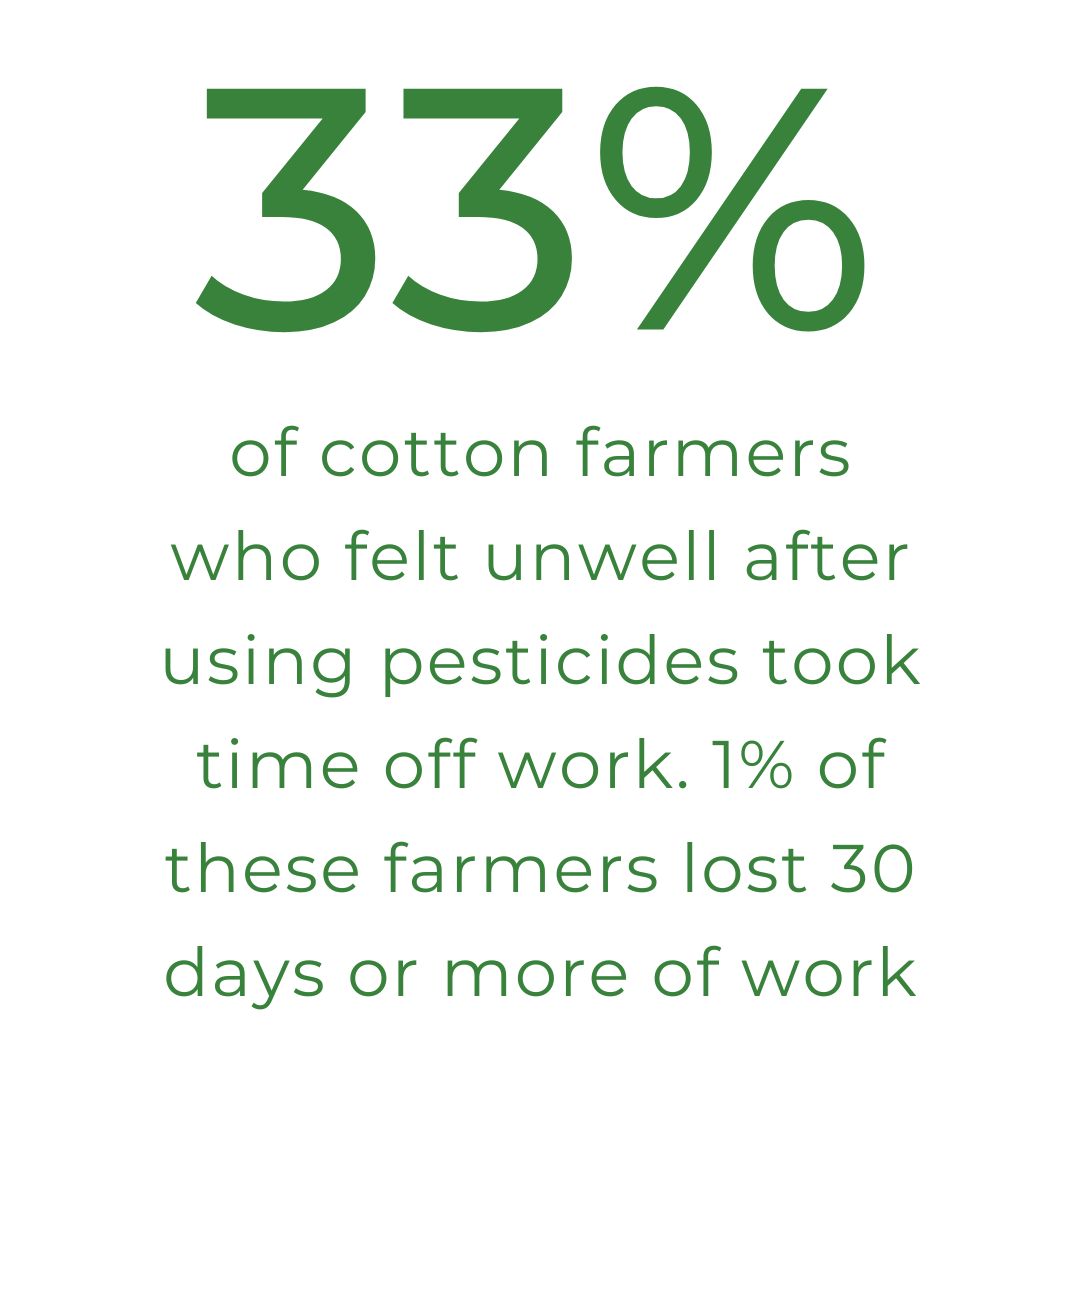 33% of cotton farmers who felt unwell after using pesticides took time off work